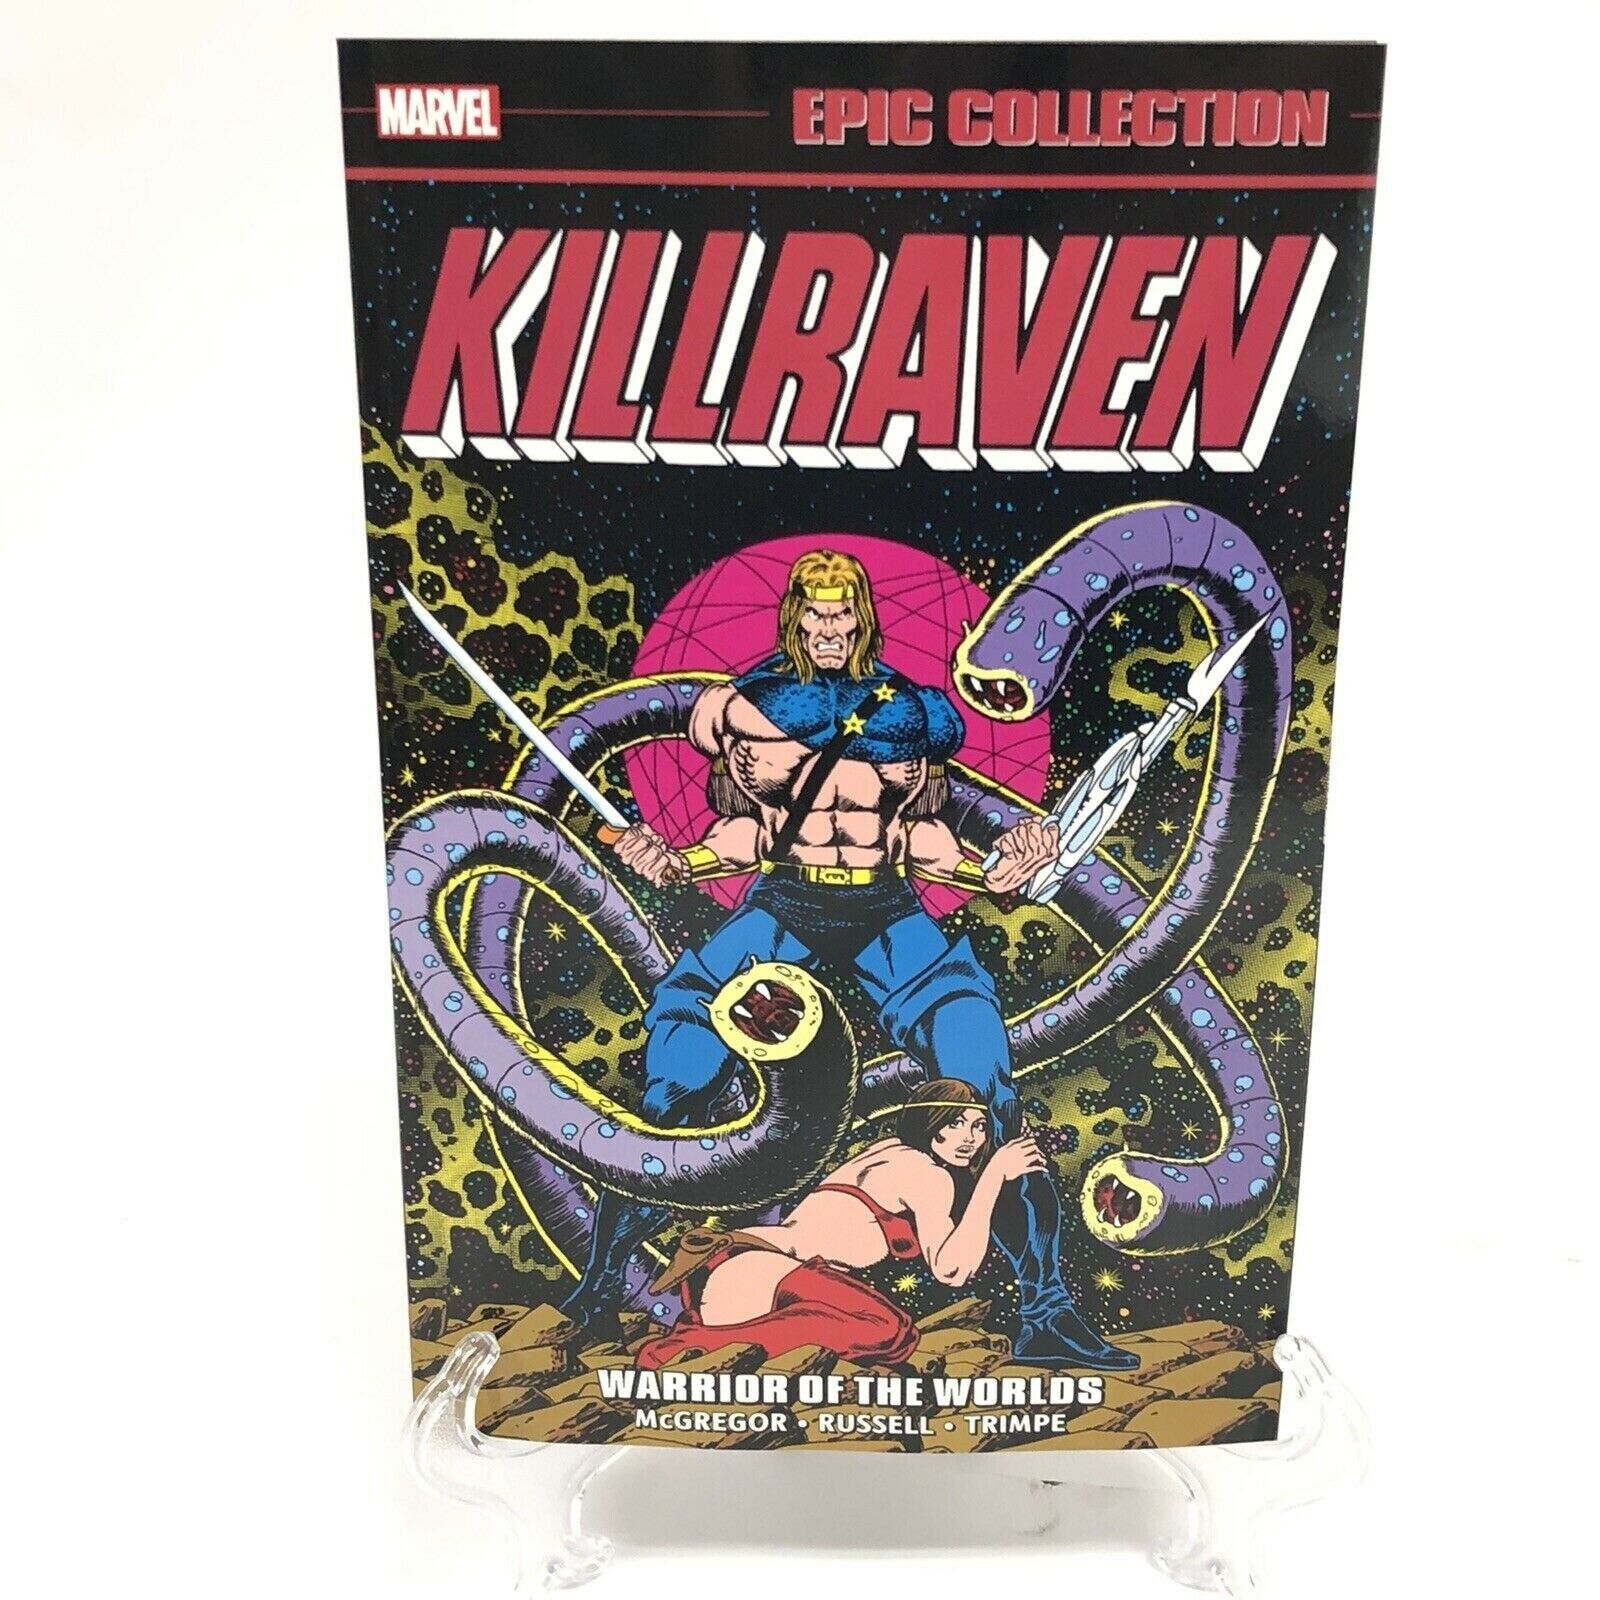 Killraven Epic Collection Vol 1 Warrior of Worlds New Marvel TPB Paperback